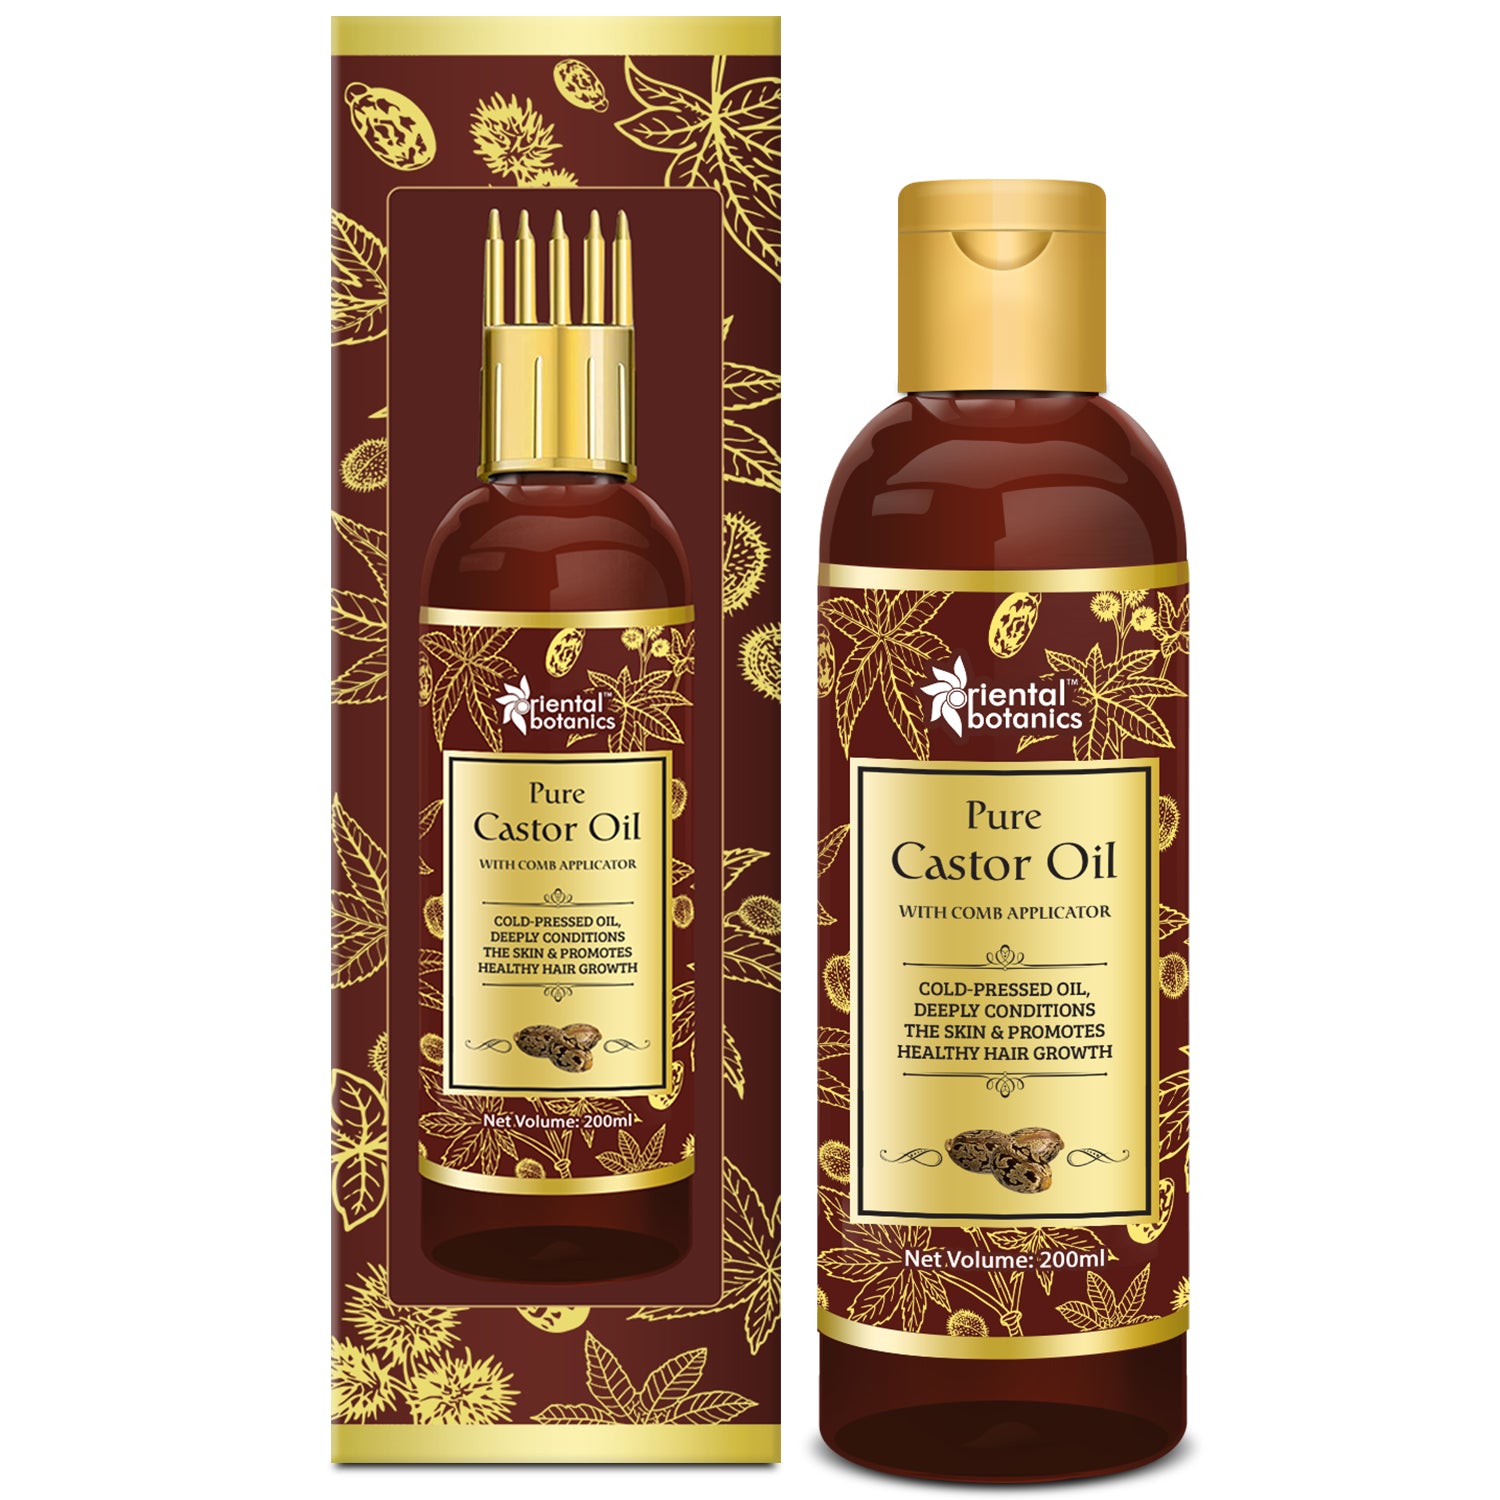 Oriental Botanics Castor Oil - For Eyelashes, Hair and Skin Care - With Comb Applicator - Pure Oil With No Mineral Oil, Silicones, 200 ml